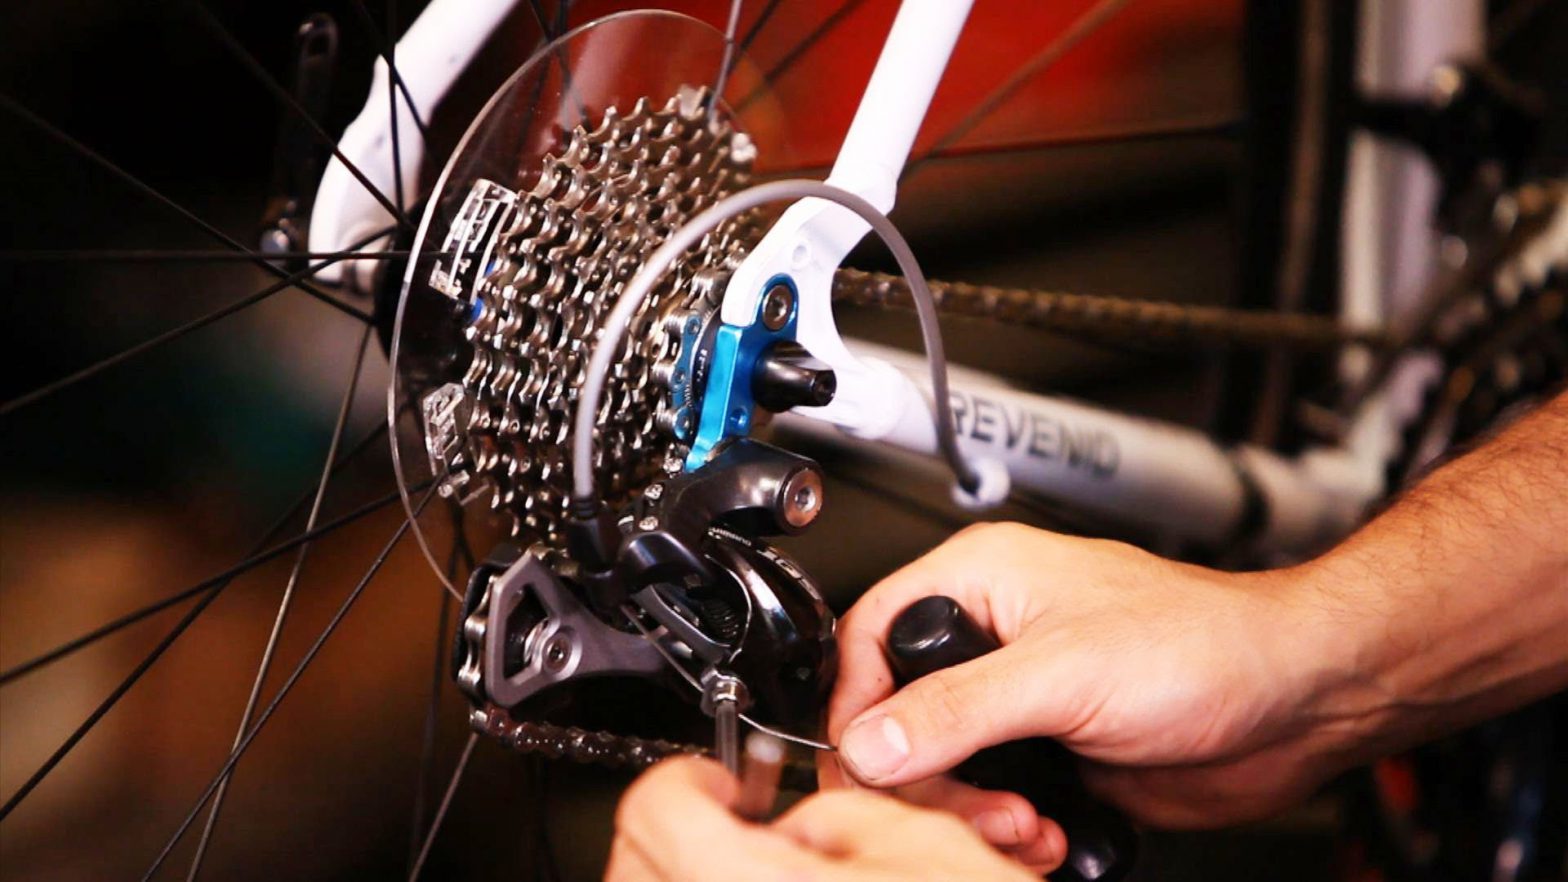 Ranking of the best bike chain squeezers for 2022